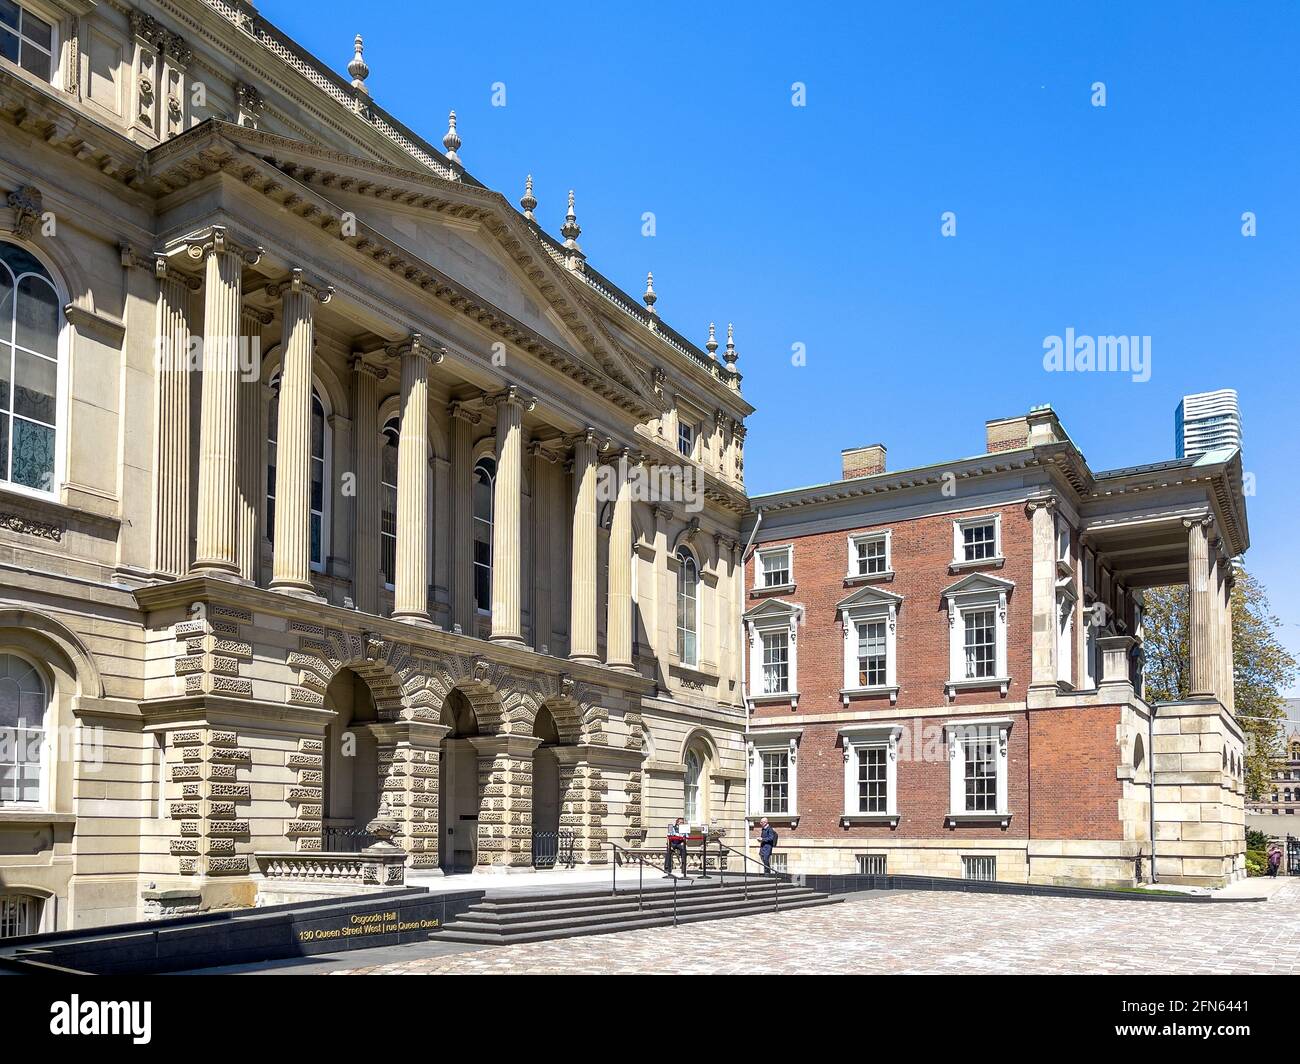 Osgoode Hall with a  late Palladian architectural style. The landmark is placed in the downtown district by the Nathan Phillips square in Toronto, Can Stock Photo